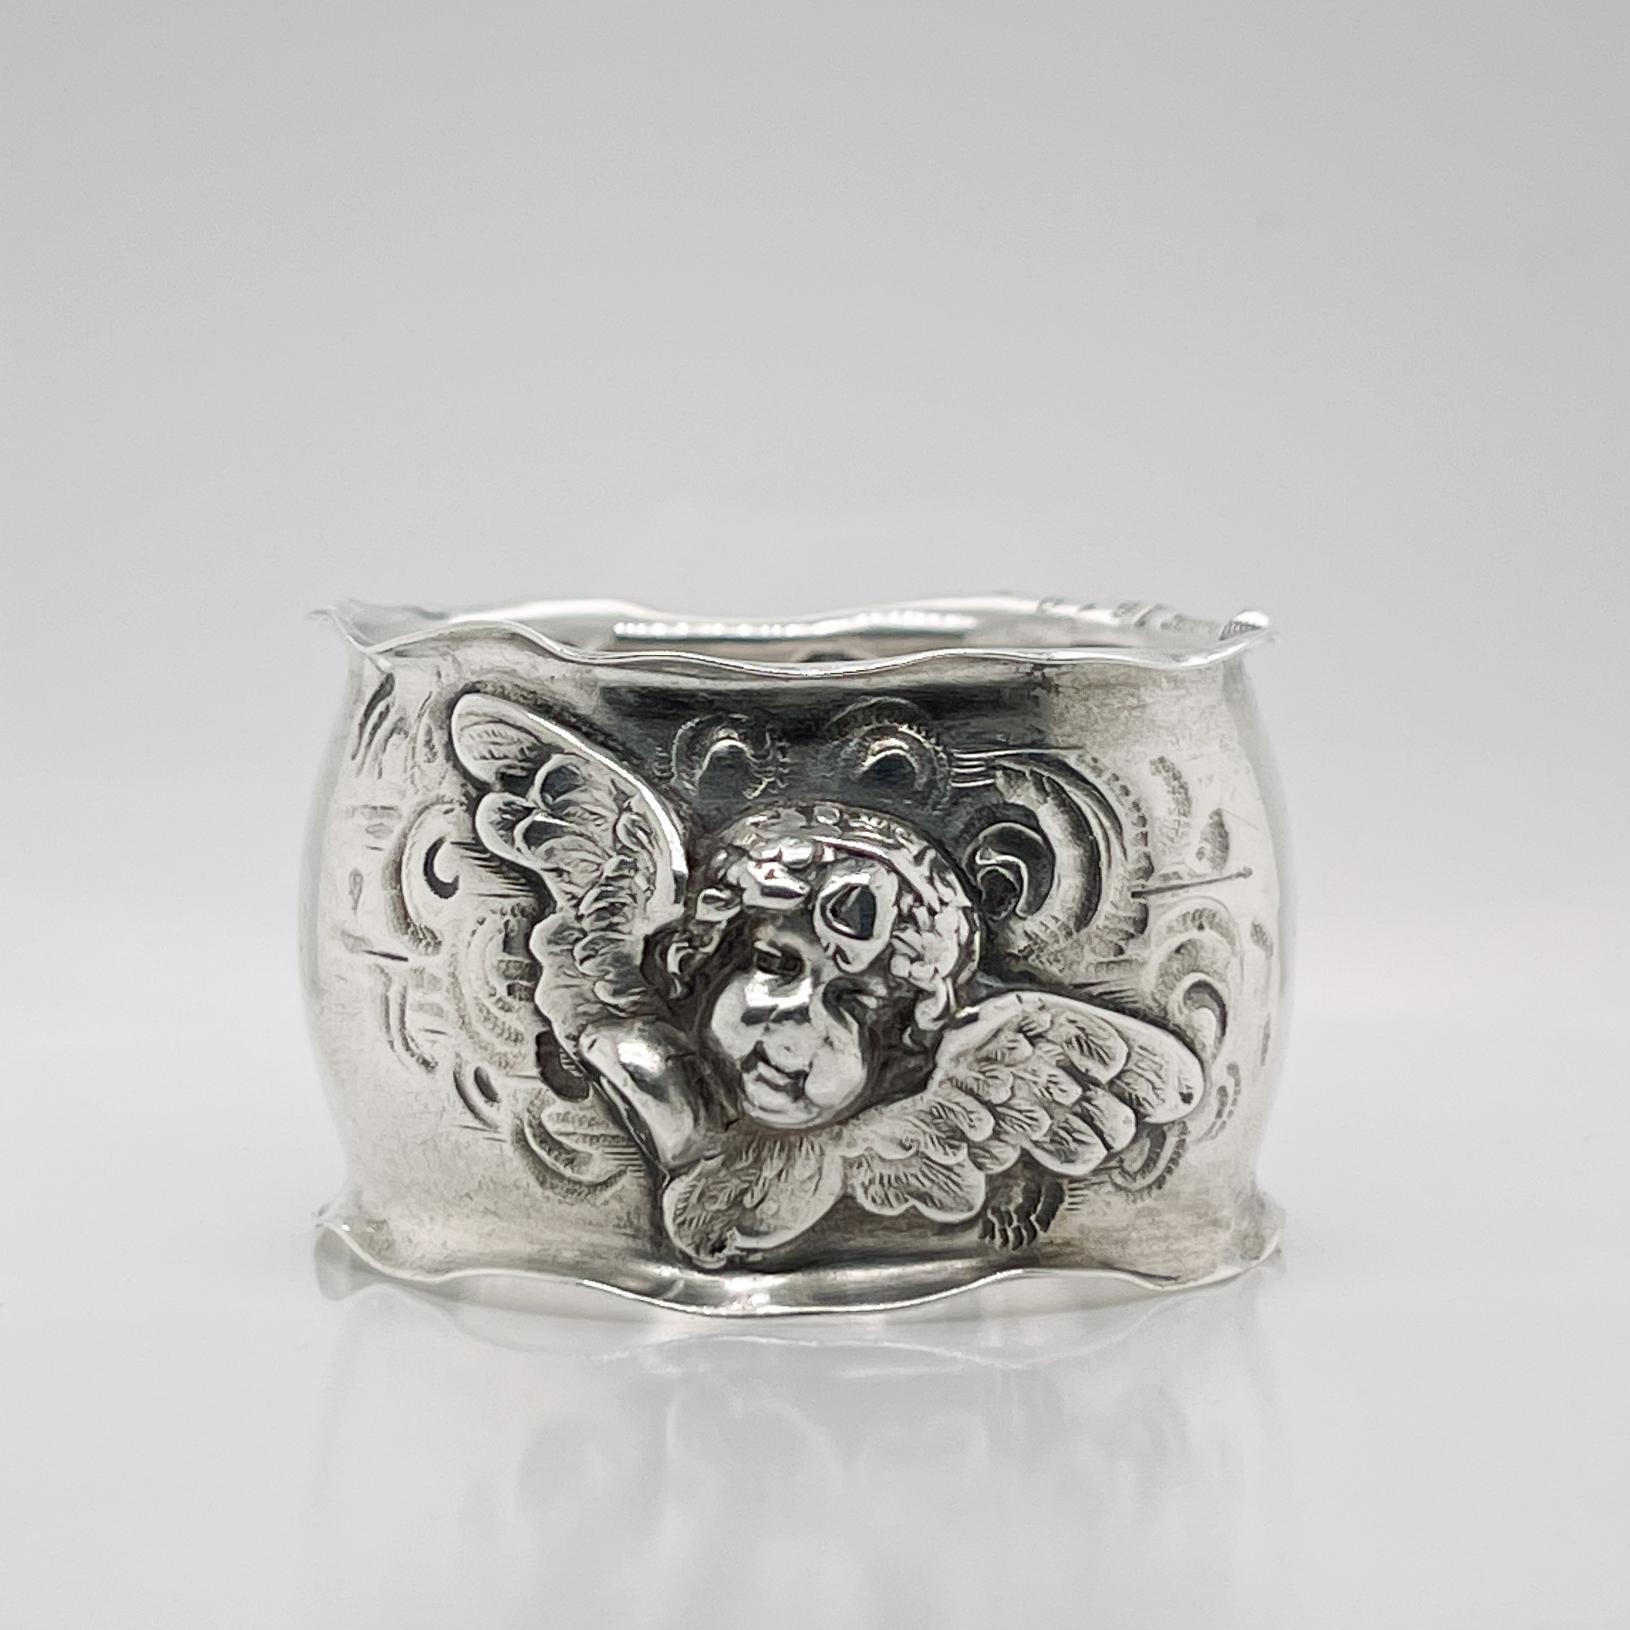 A fine antique Art Nouveau napkin ring

By the George Shiebler Silver Company of Baltimore, Maryland.

With raised winged cherub or putti heads to both the front and back (seemingly after the cherubs in Raphael's Sistine Madonna painting).

Simply